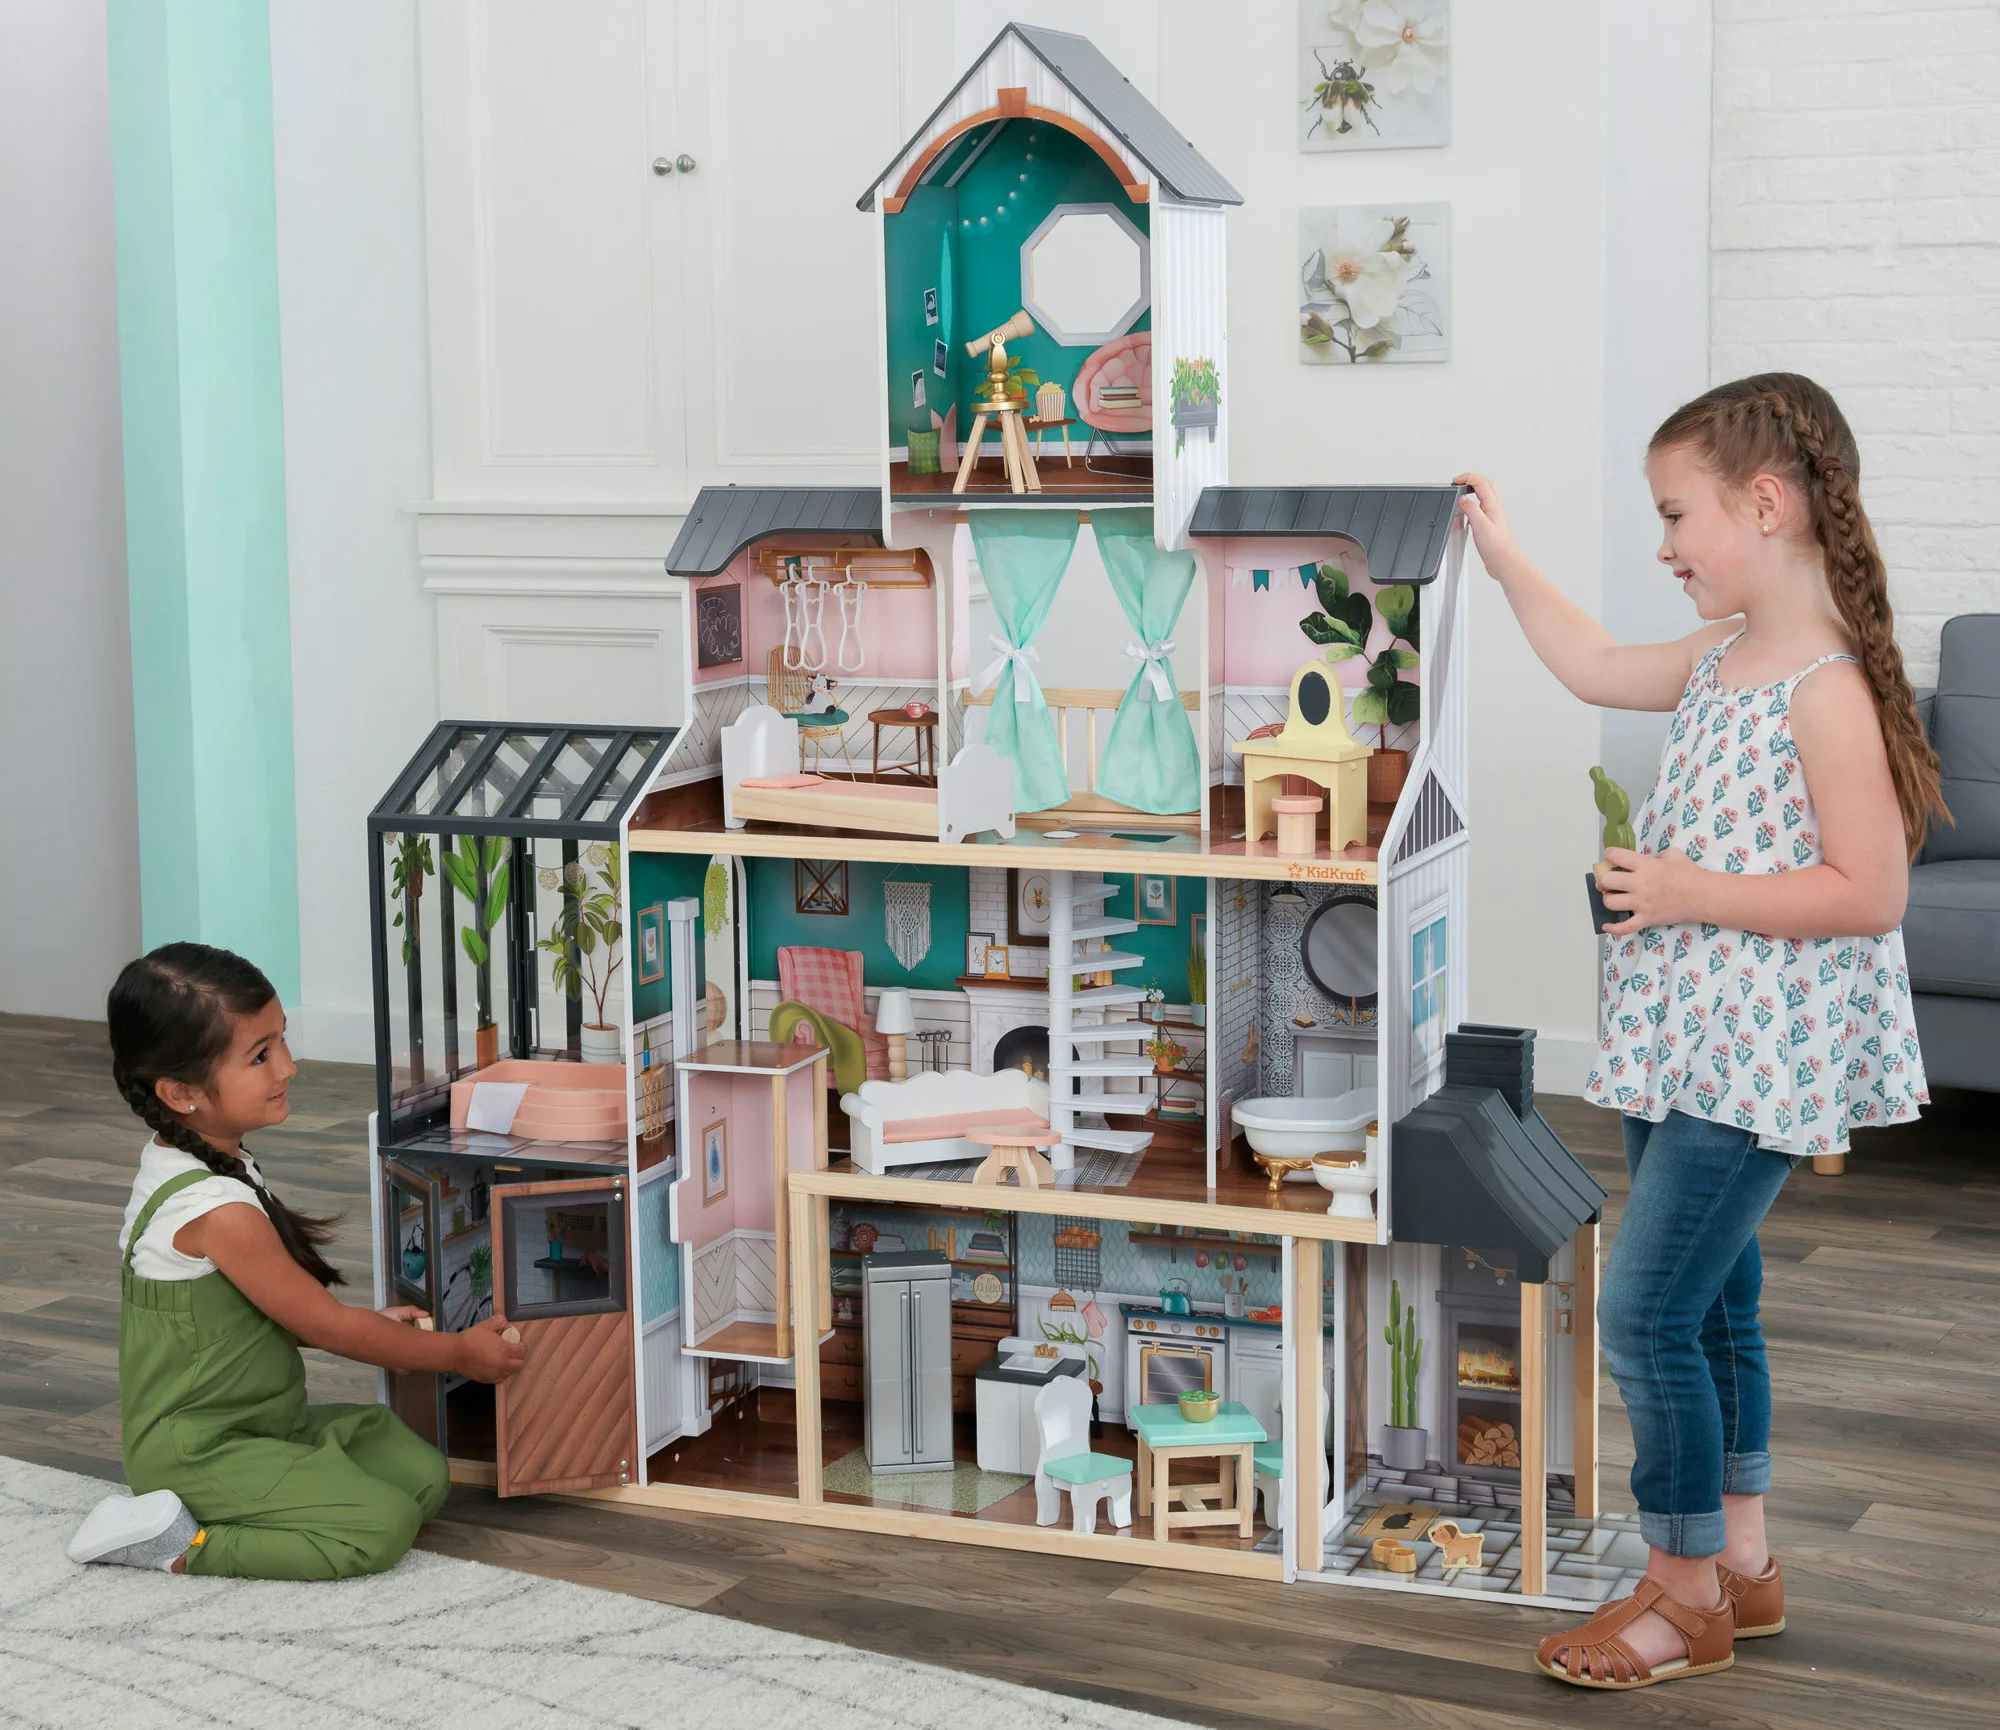 Children playing with a KidKraft Celeste Mansion Dollhouse